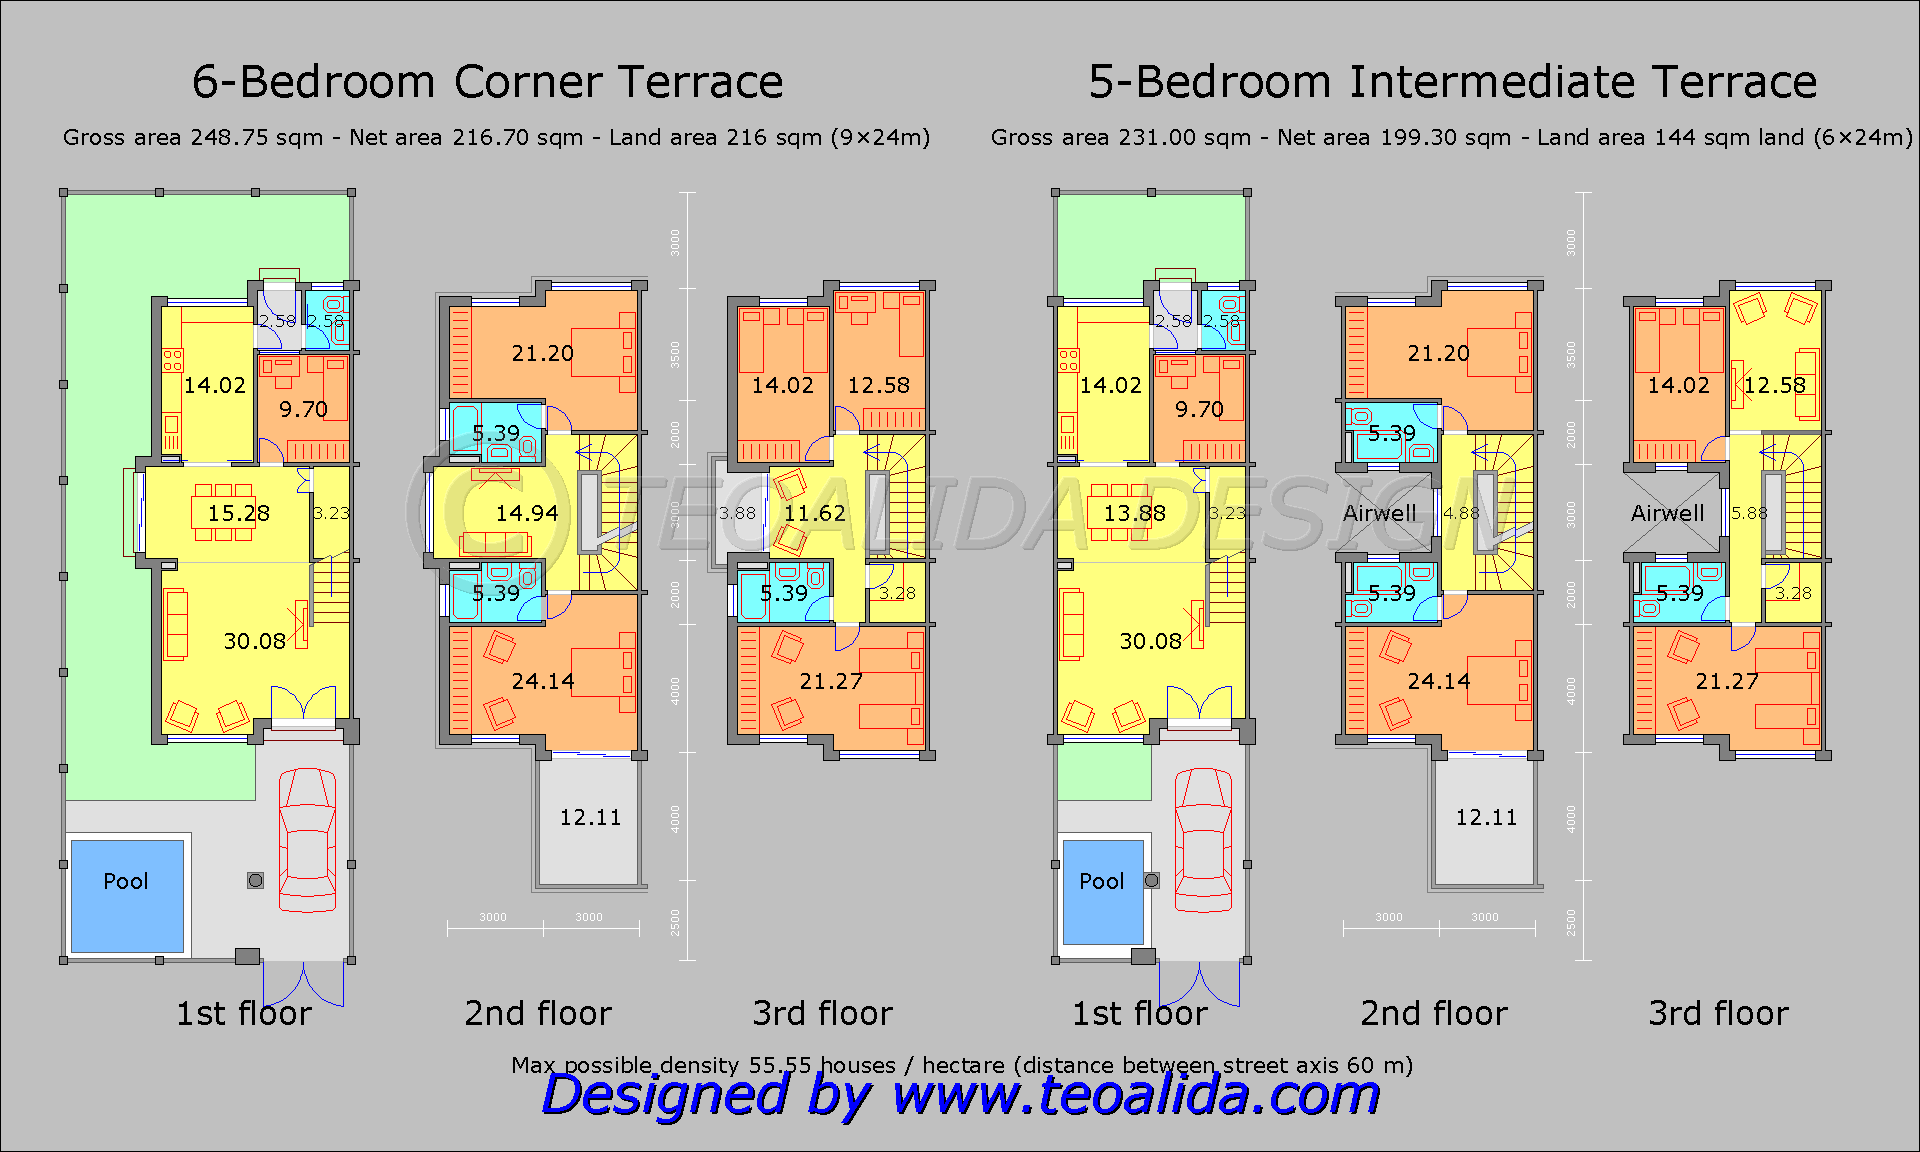 House floor plans 50-400 sqm designed by me - The world of Teoalida